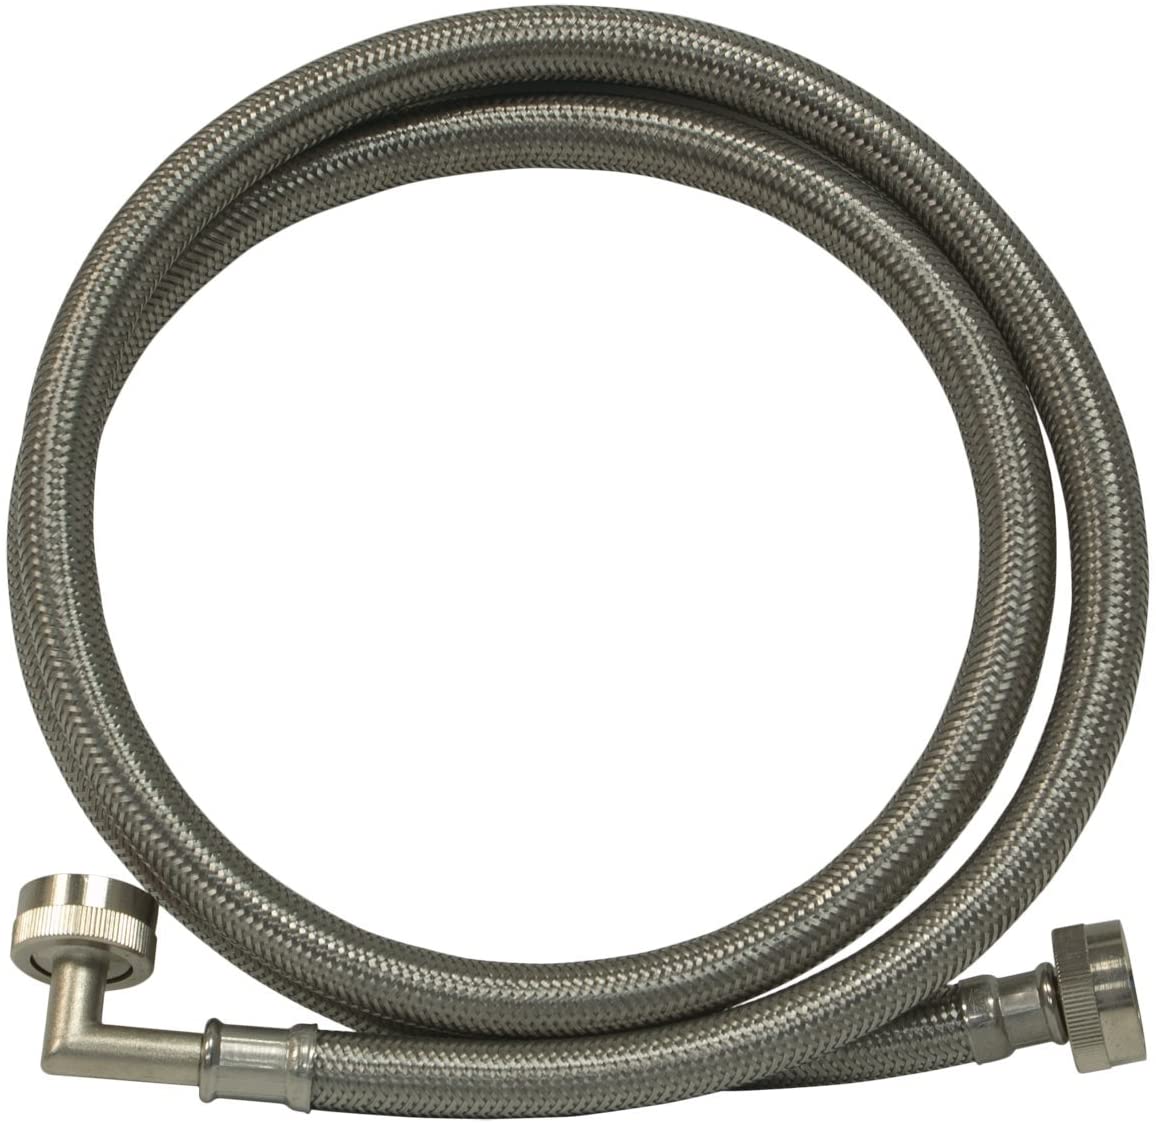 5 Ft Stainless Steel Washer Machine Hose with 90 deg elbow - 48374